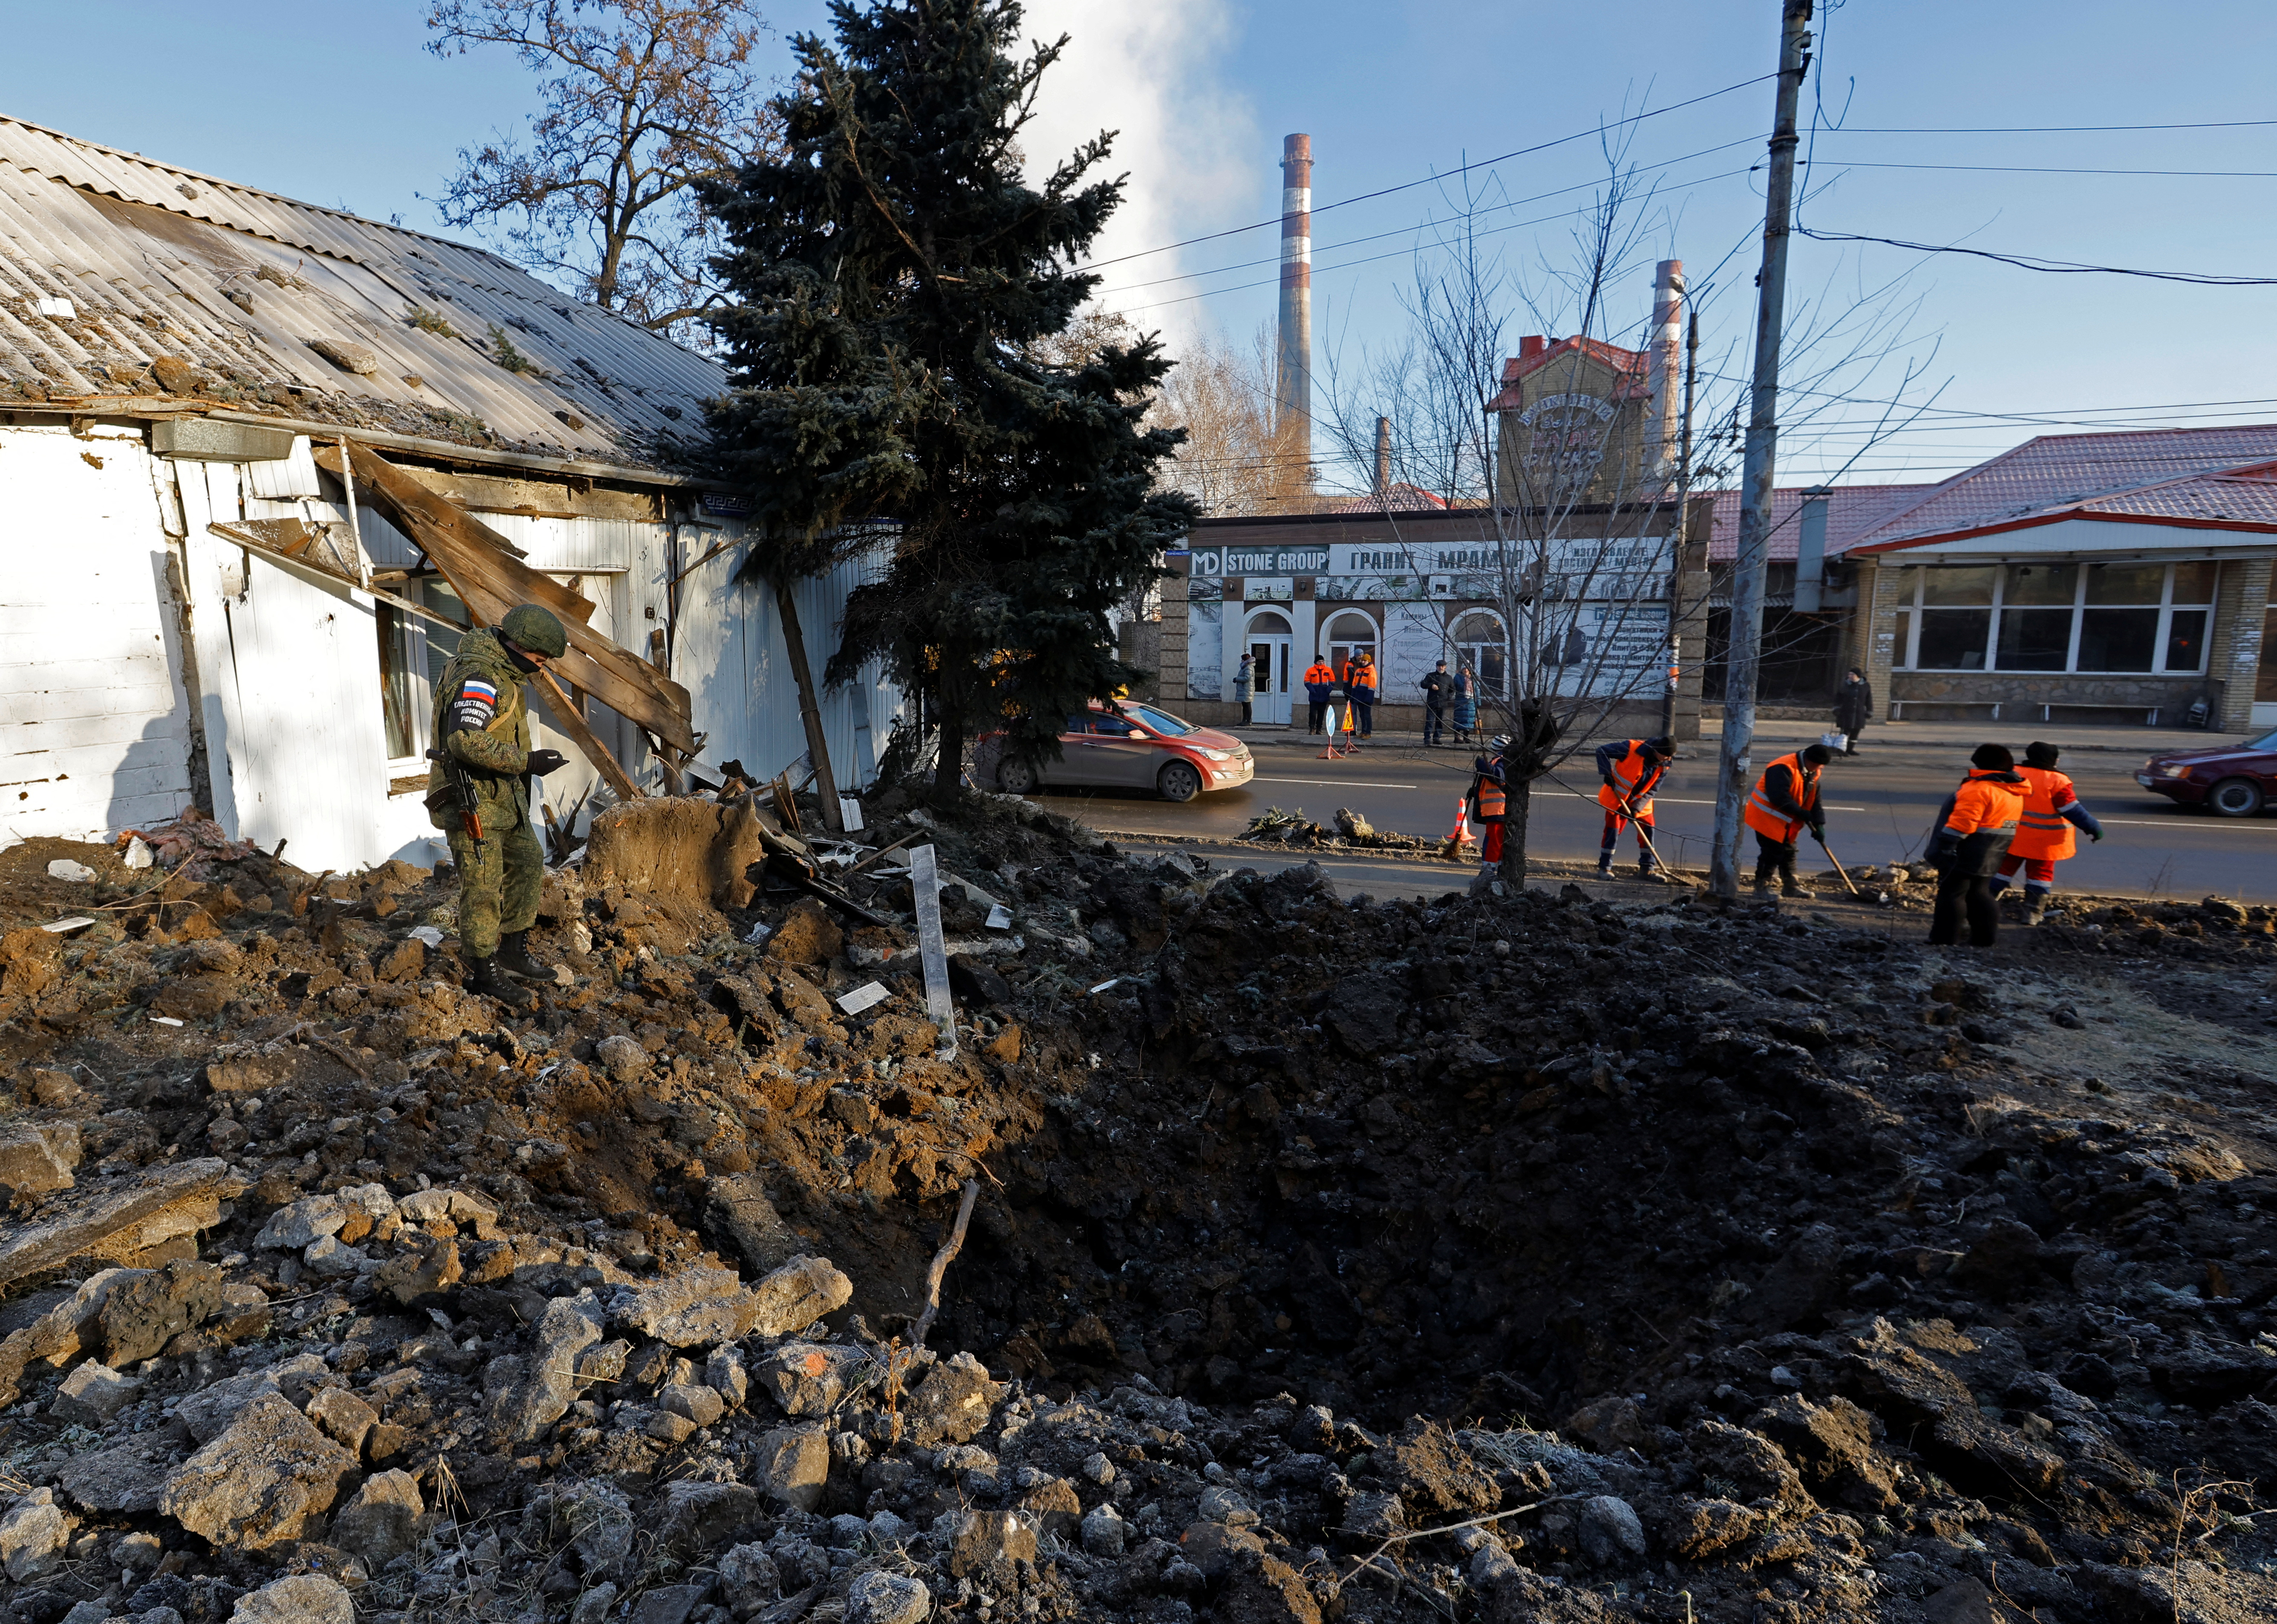 Aftermath of recent shelling in Donetsk